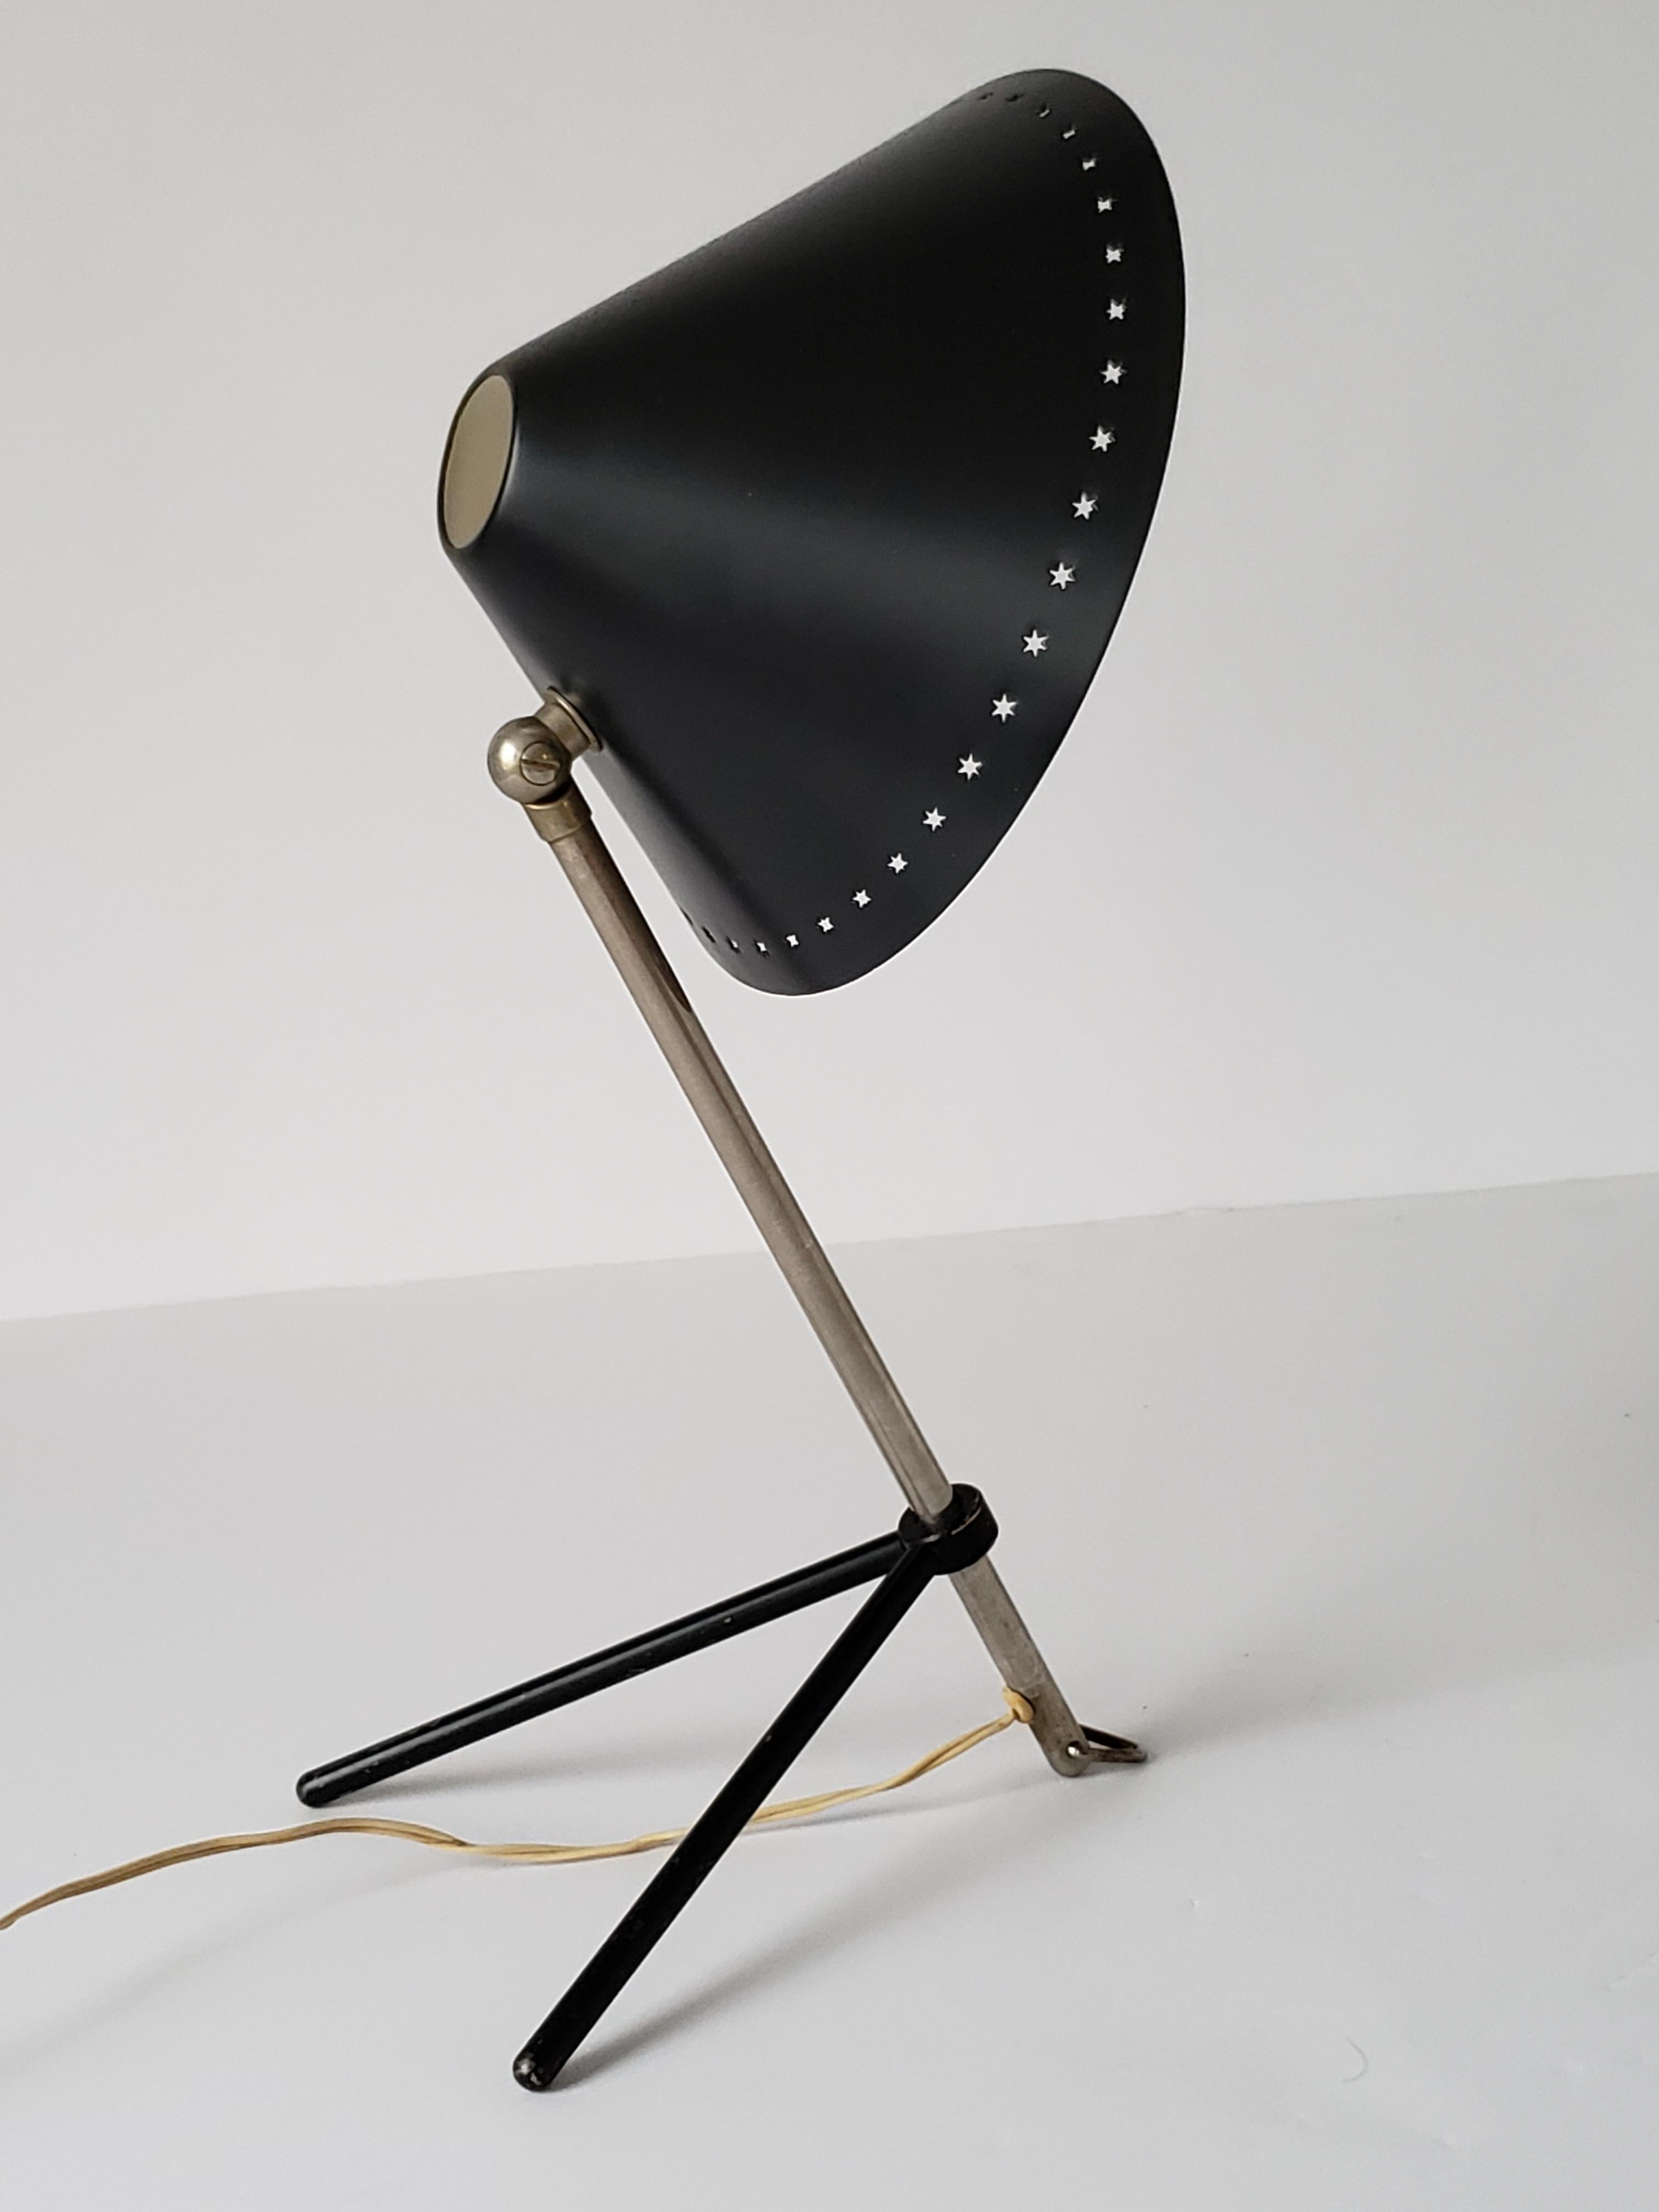 Versatile , agile , Classic midcentury European table or wall lamp. 

Enameled conical aluminium shade with pierced star motif. 

Aluminium stem rotate 360 degree and slide up and down on the solid steel enameled V base. 

Cast a large glowing